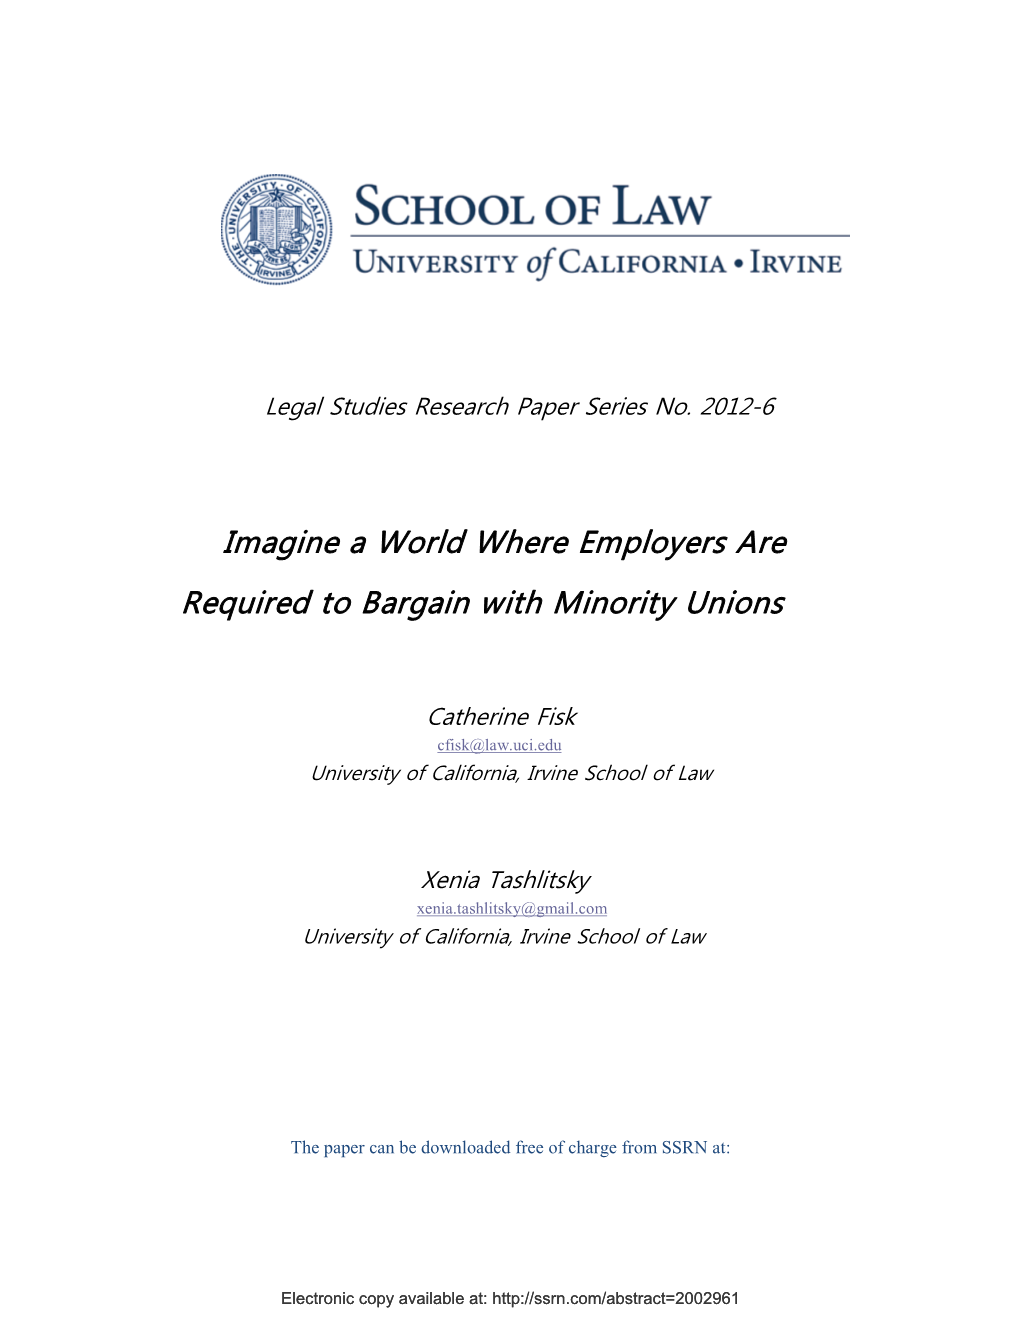 Imagine a World Where Employers Are Required to Bargain with Minority Unions Catherine Fisk and Xenia Tashlitsky*